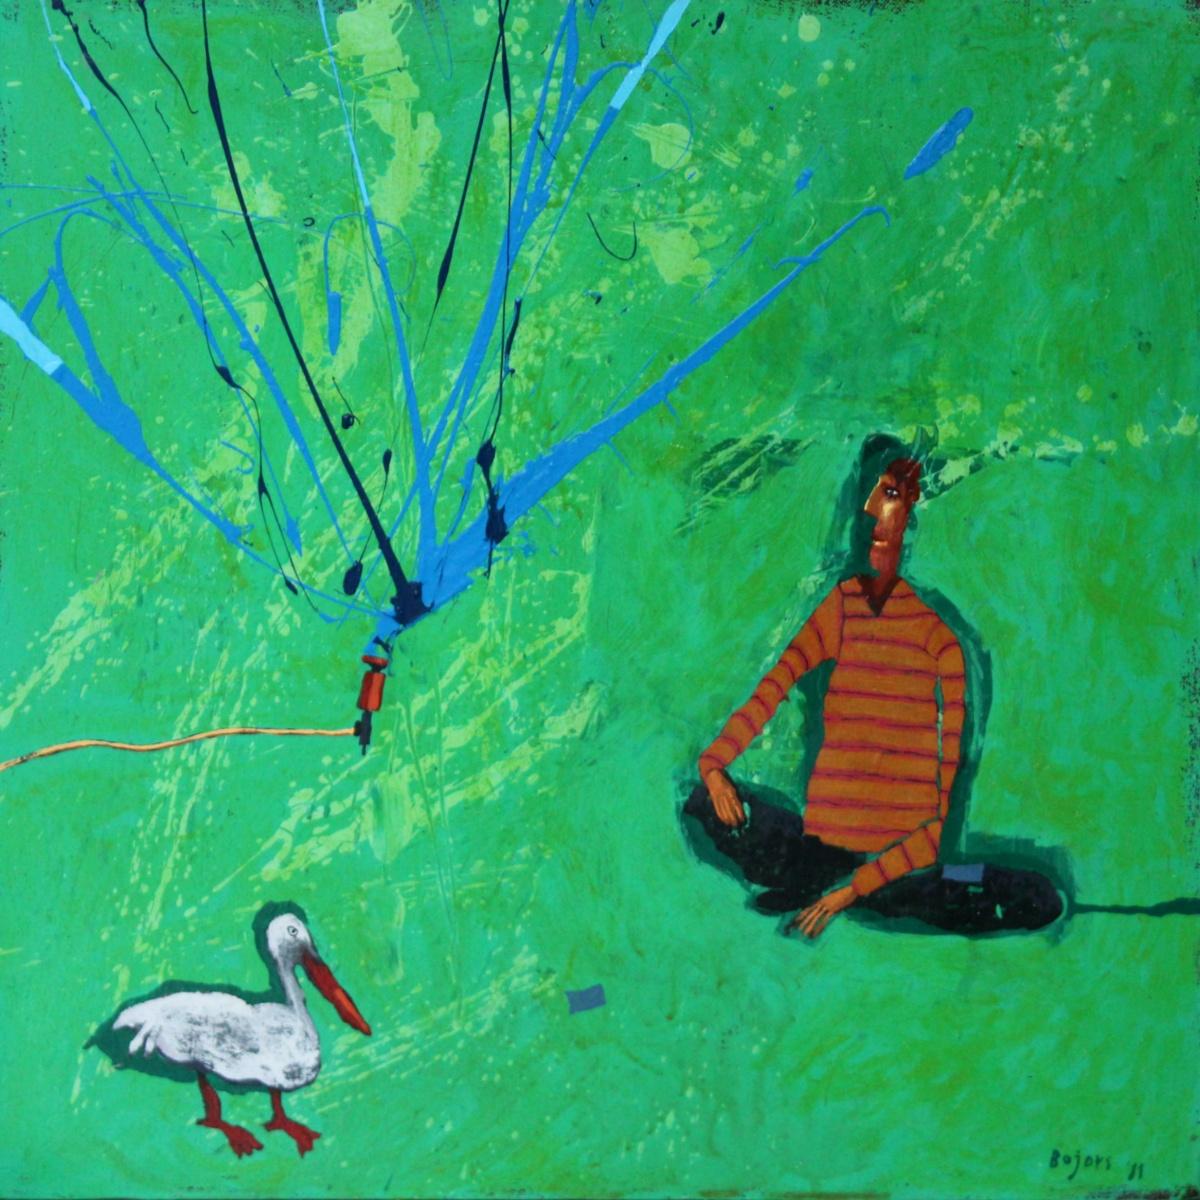 Encounter with a bird - Acrylic figurative painting, Landscape, Vibrant Green